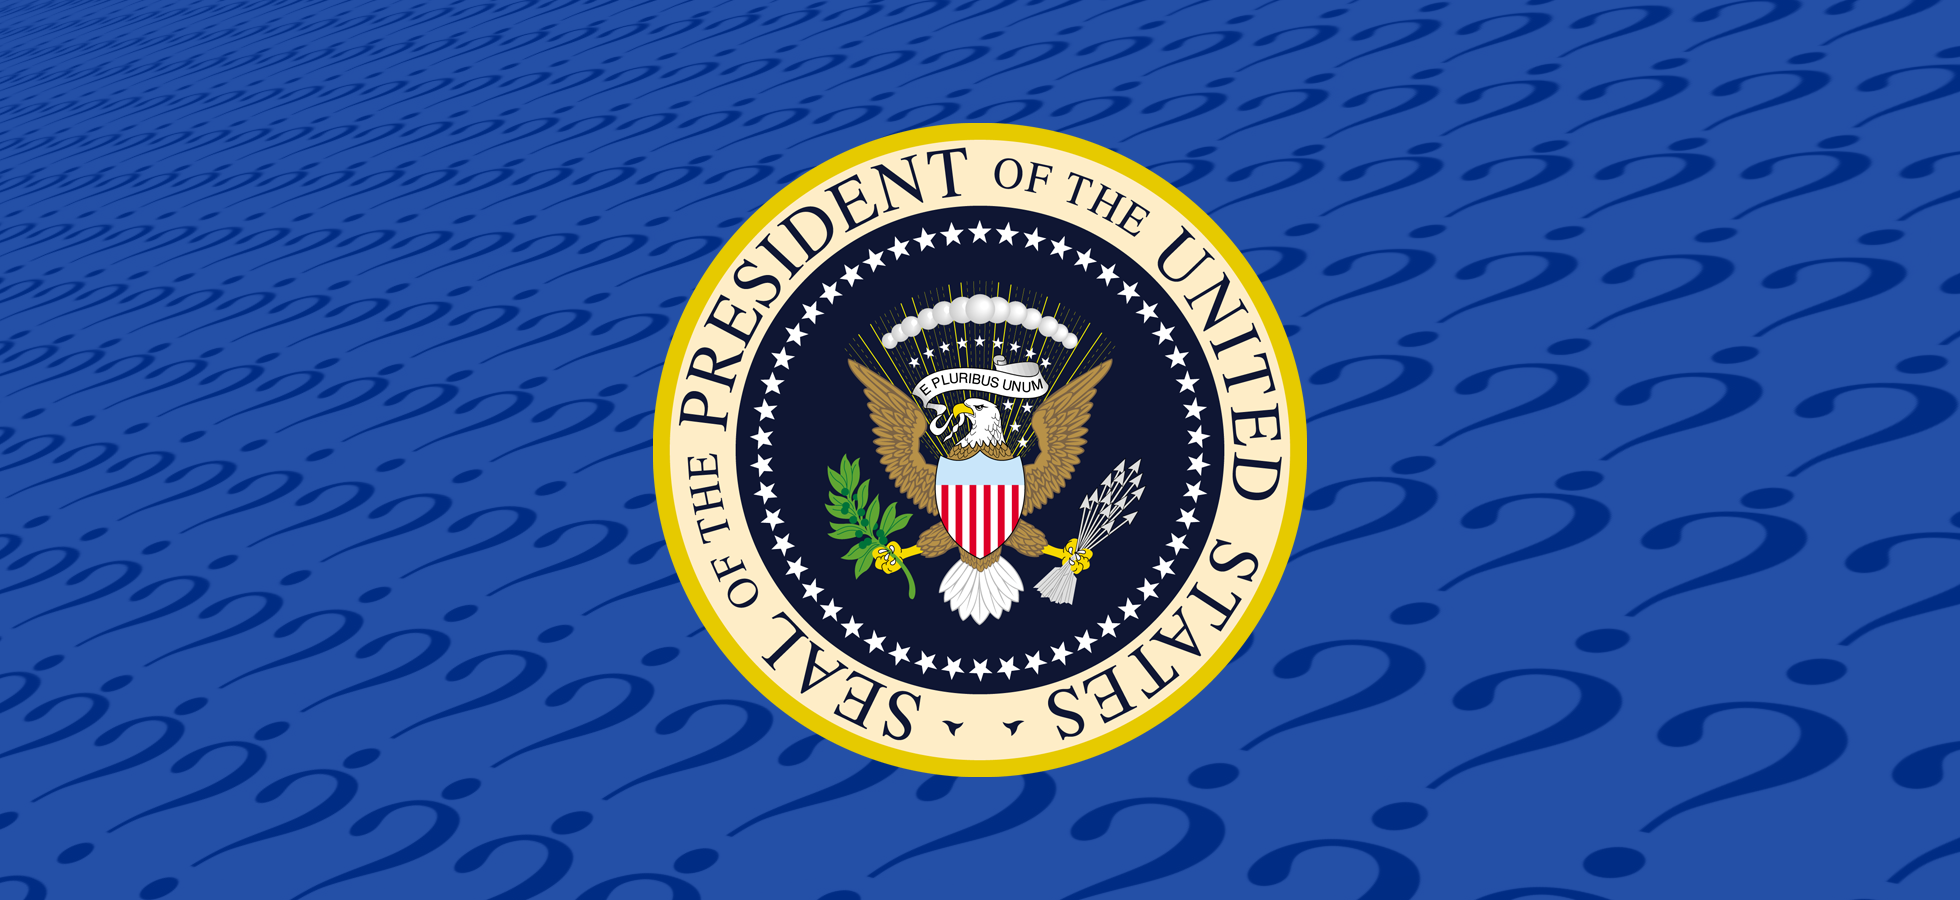 Photo of the Presidential Seal of the United States